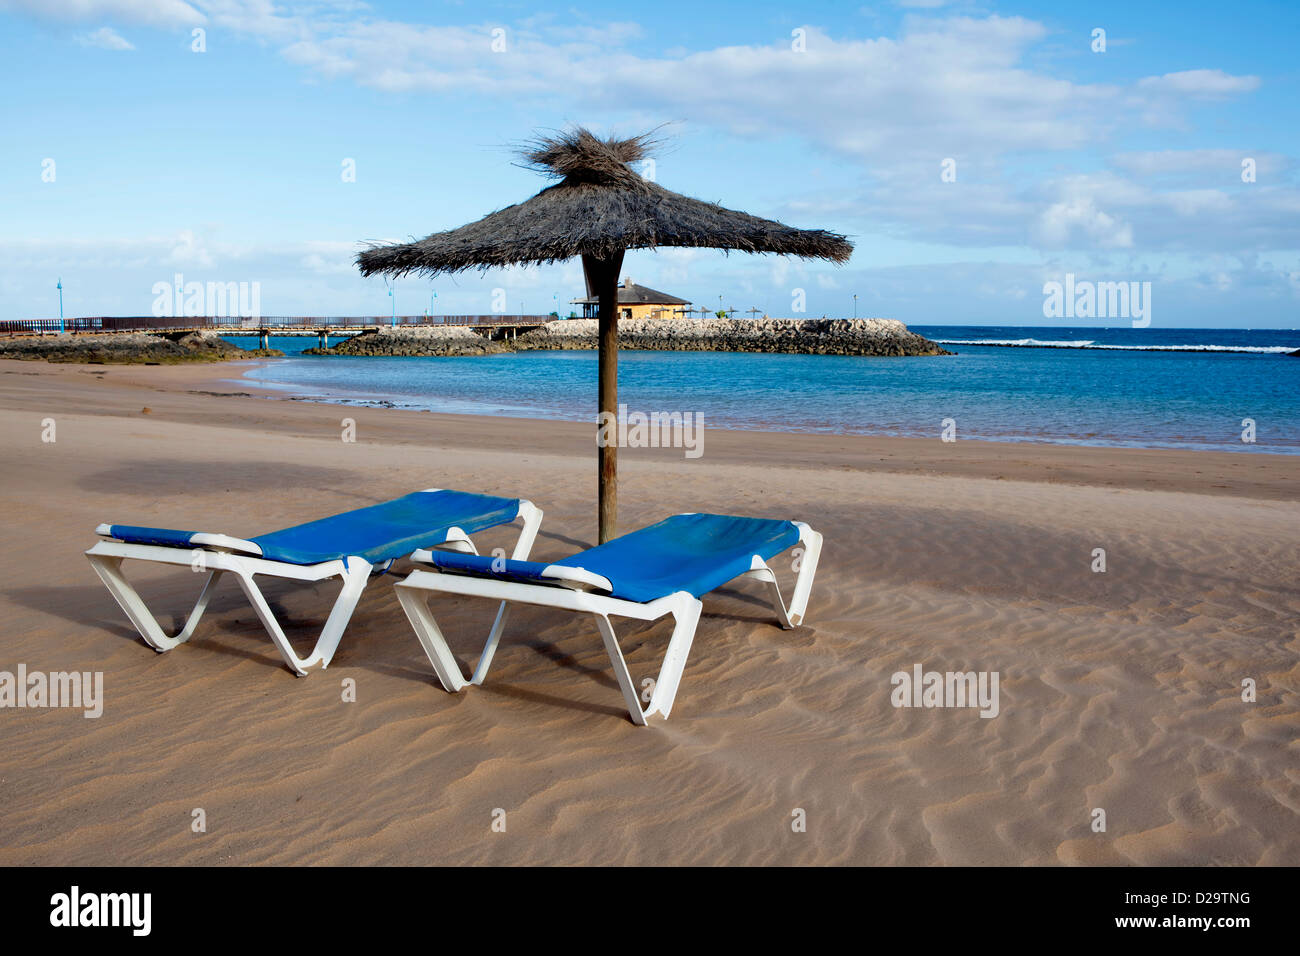 Relaxation. An image of lounger deck chairs with beach huts at the beach in Fuerteventura, Canary Islands, Spain. Stock Photo